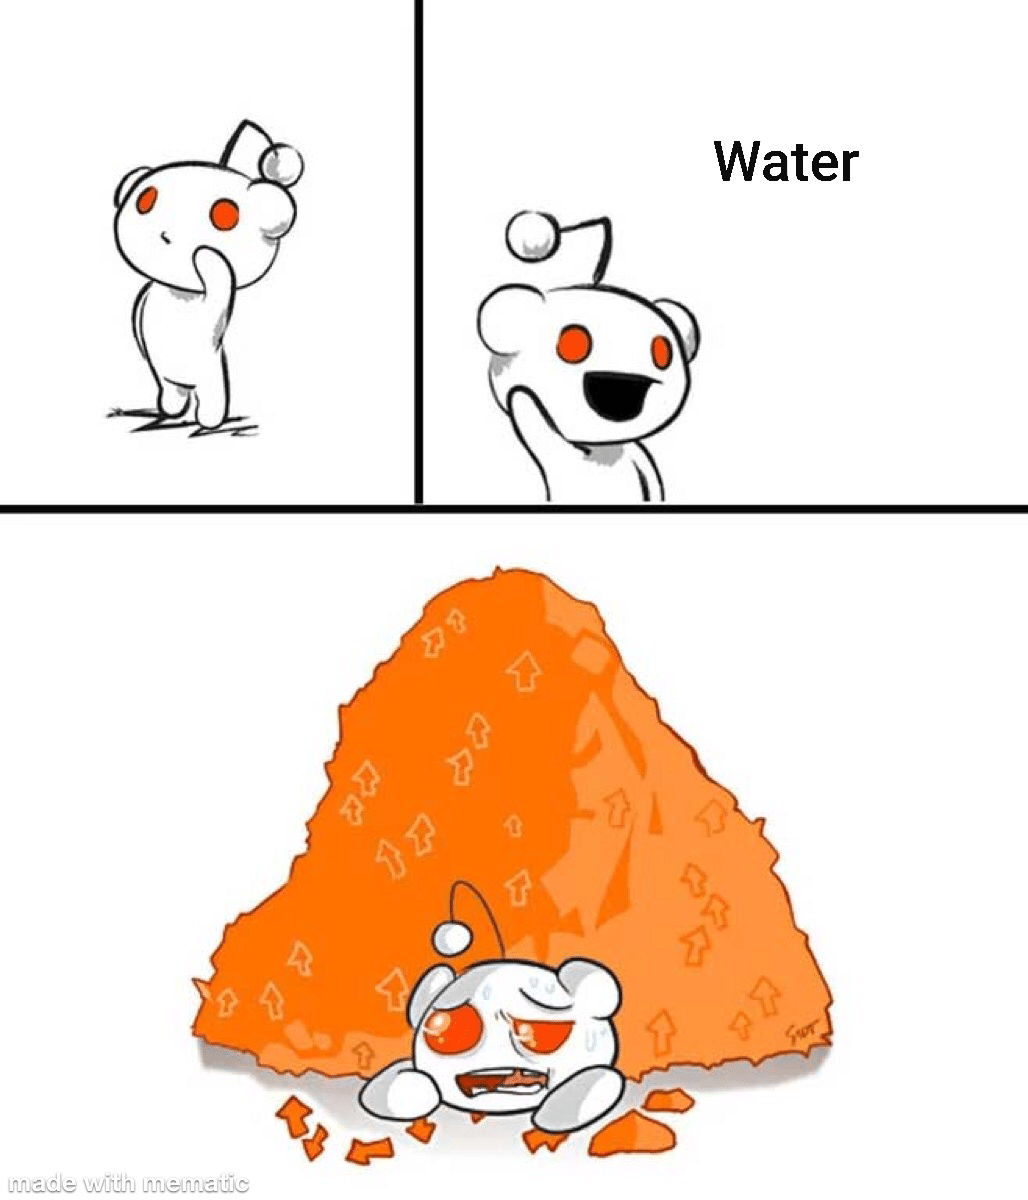 water water-memes water text: Water 